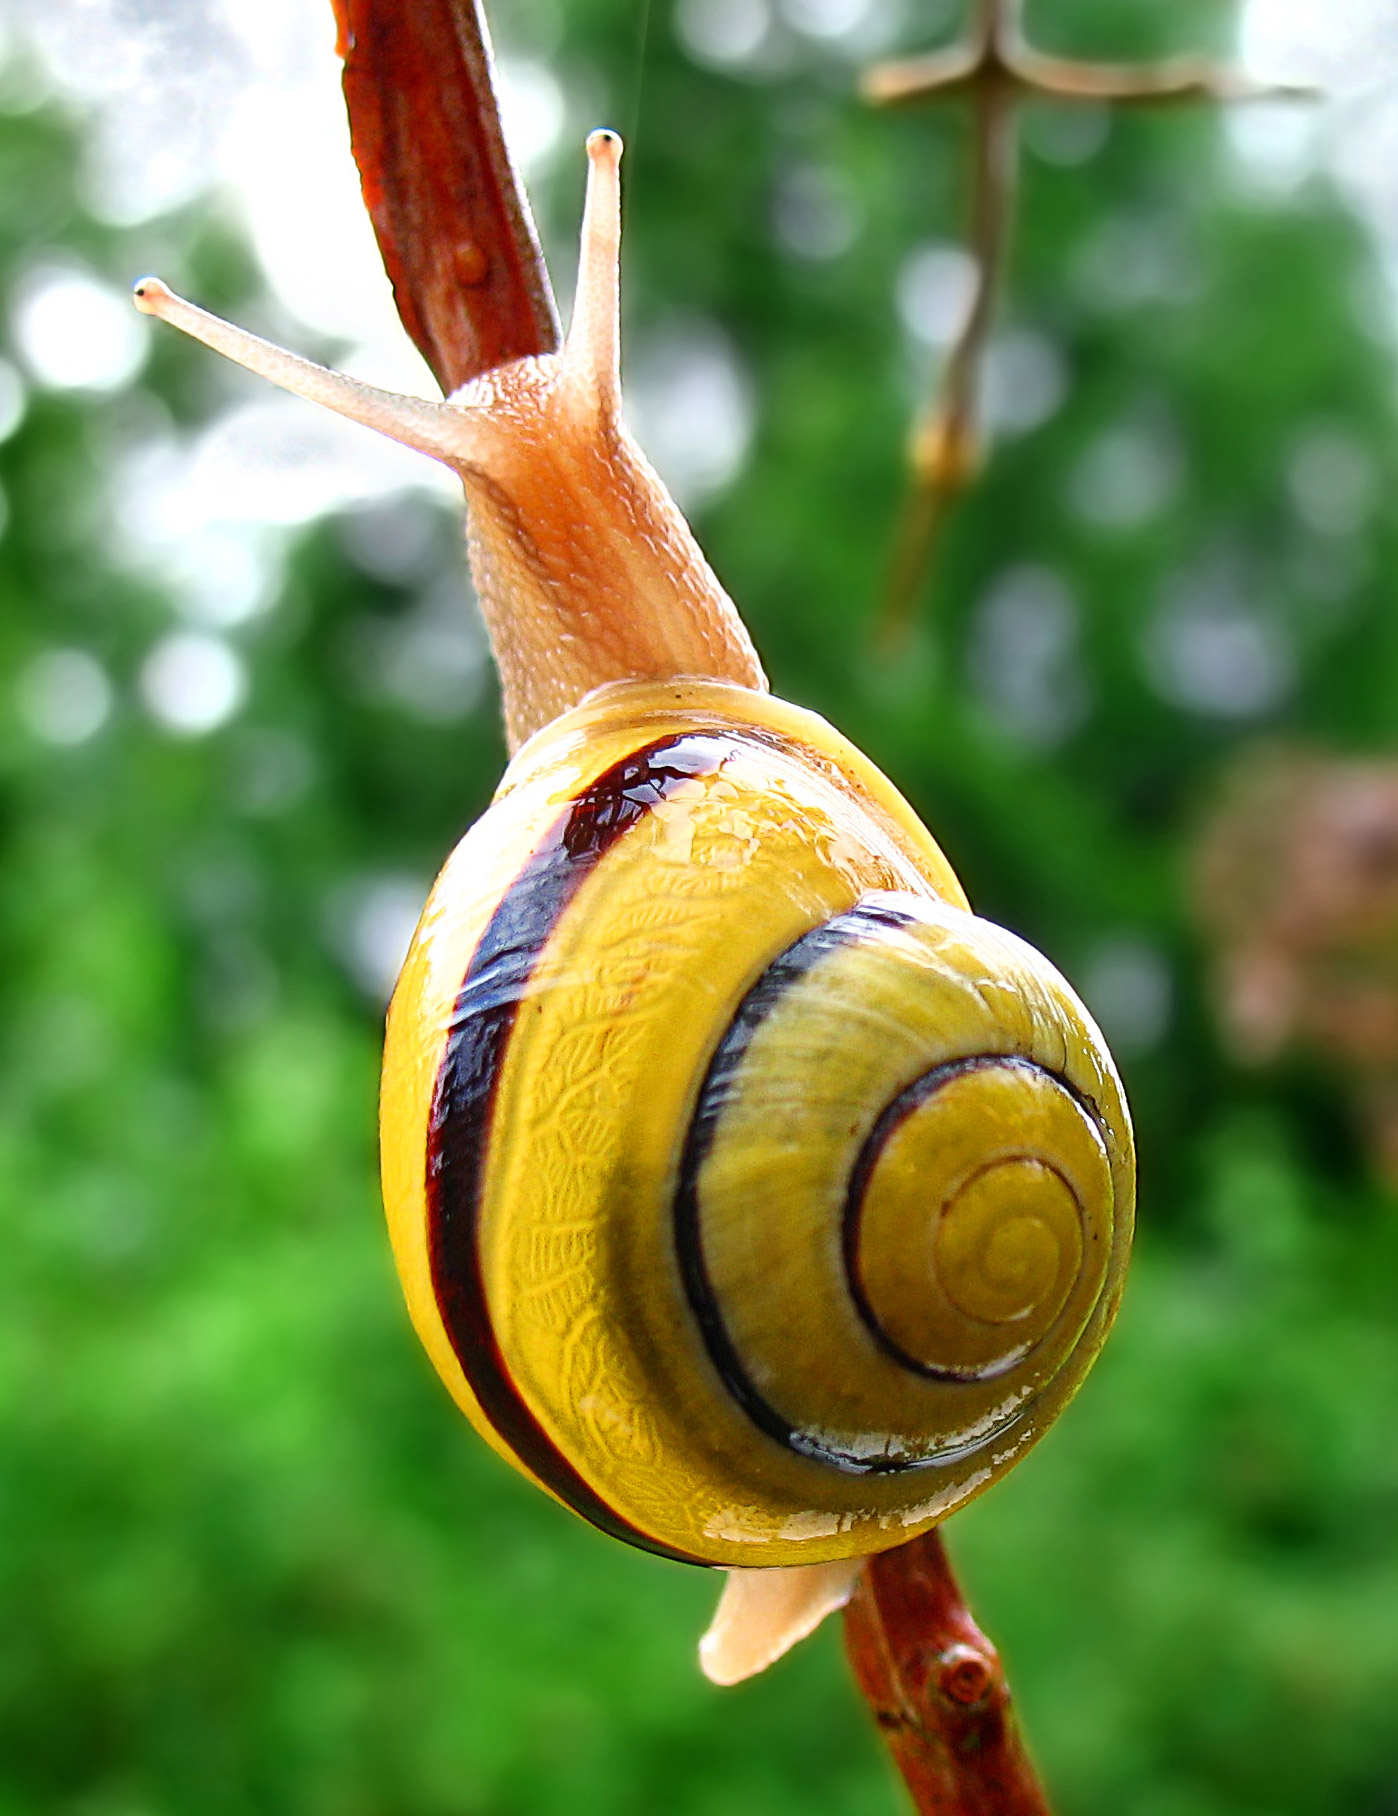 Grove snail - yellow outer shell - bark, tree, nature